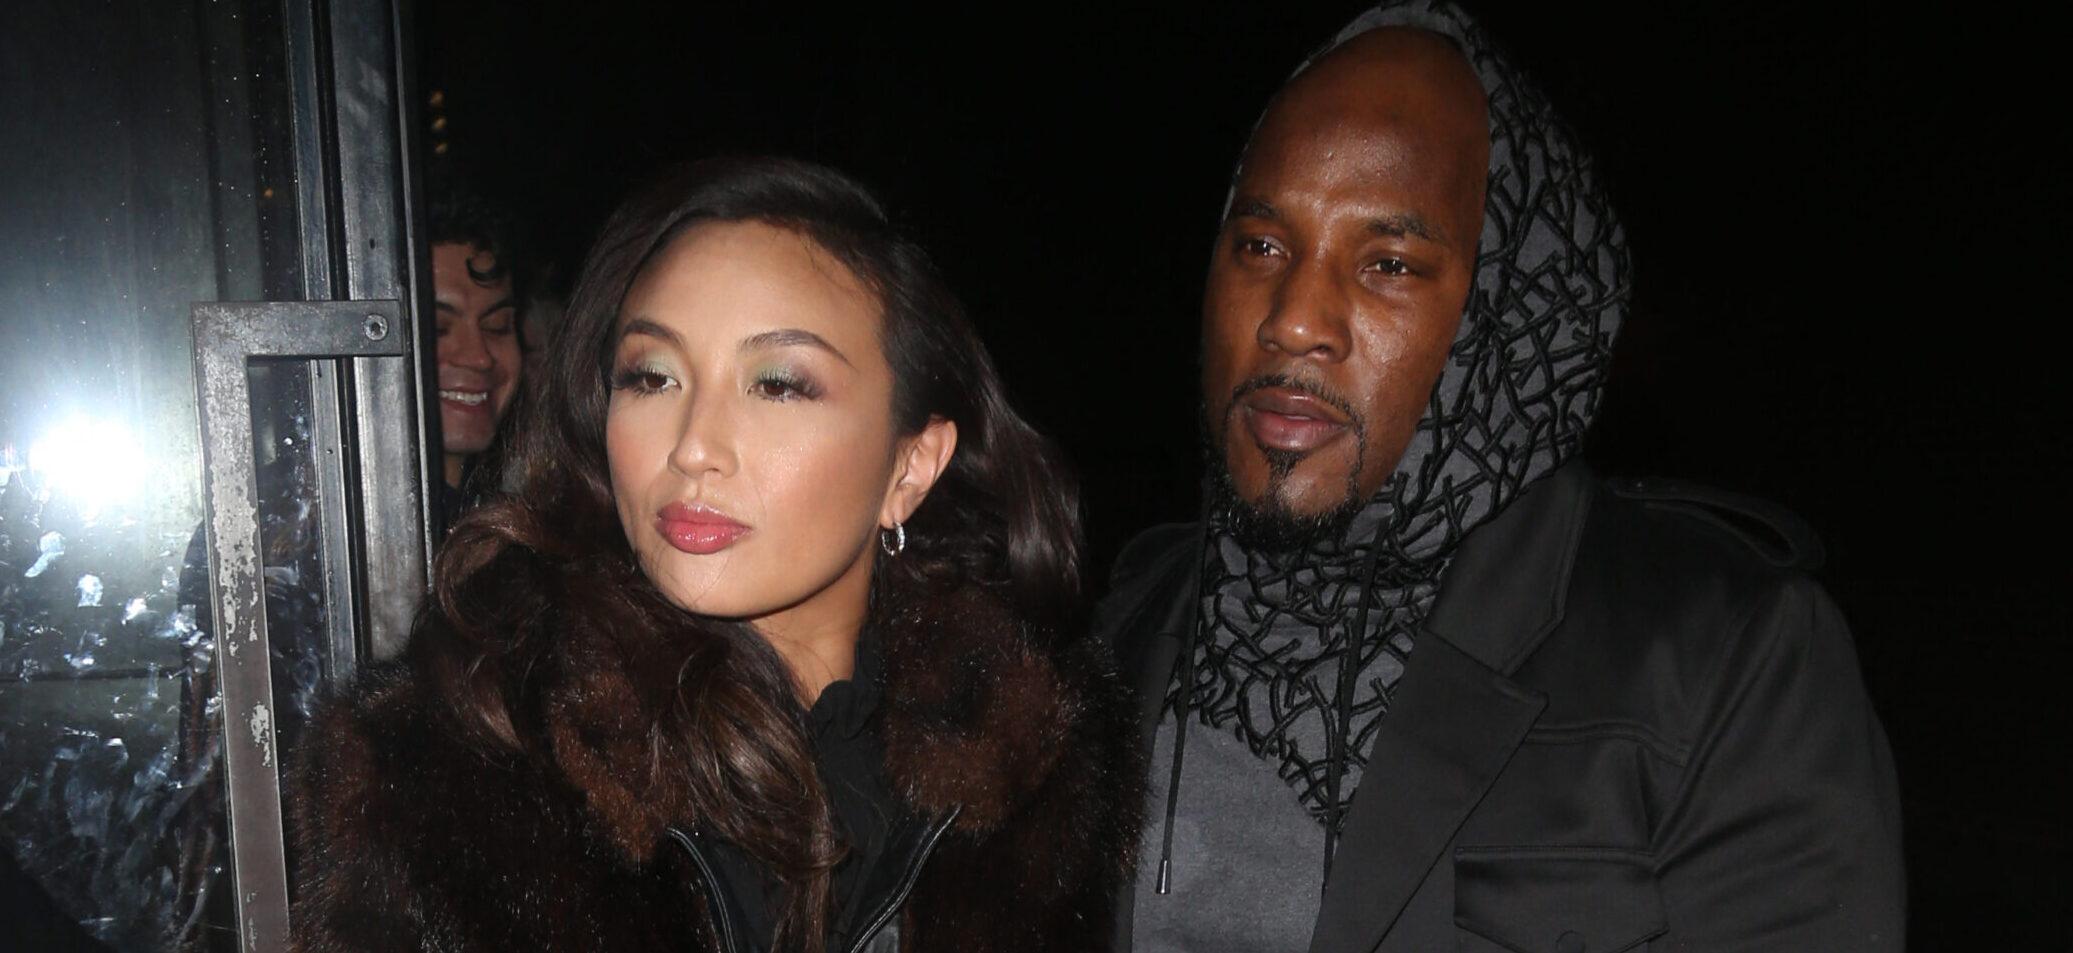 Jeannie Mai and Jeezy out and about in New York City